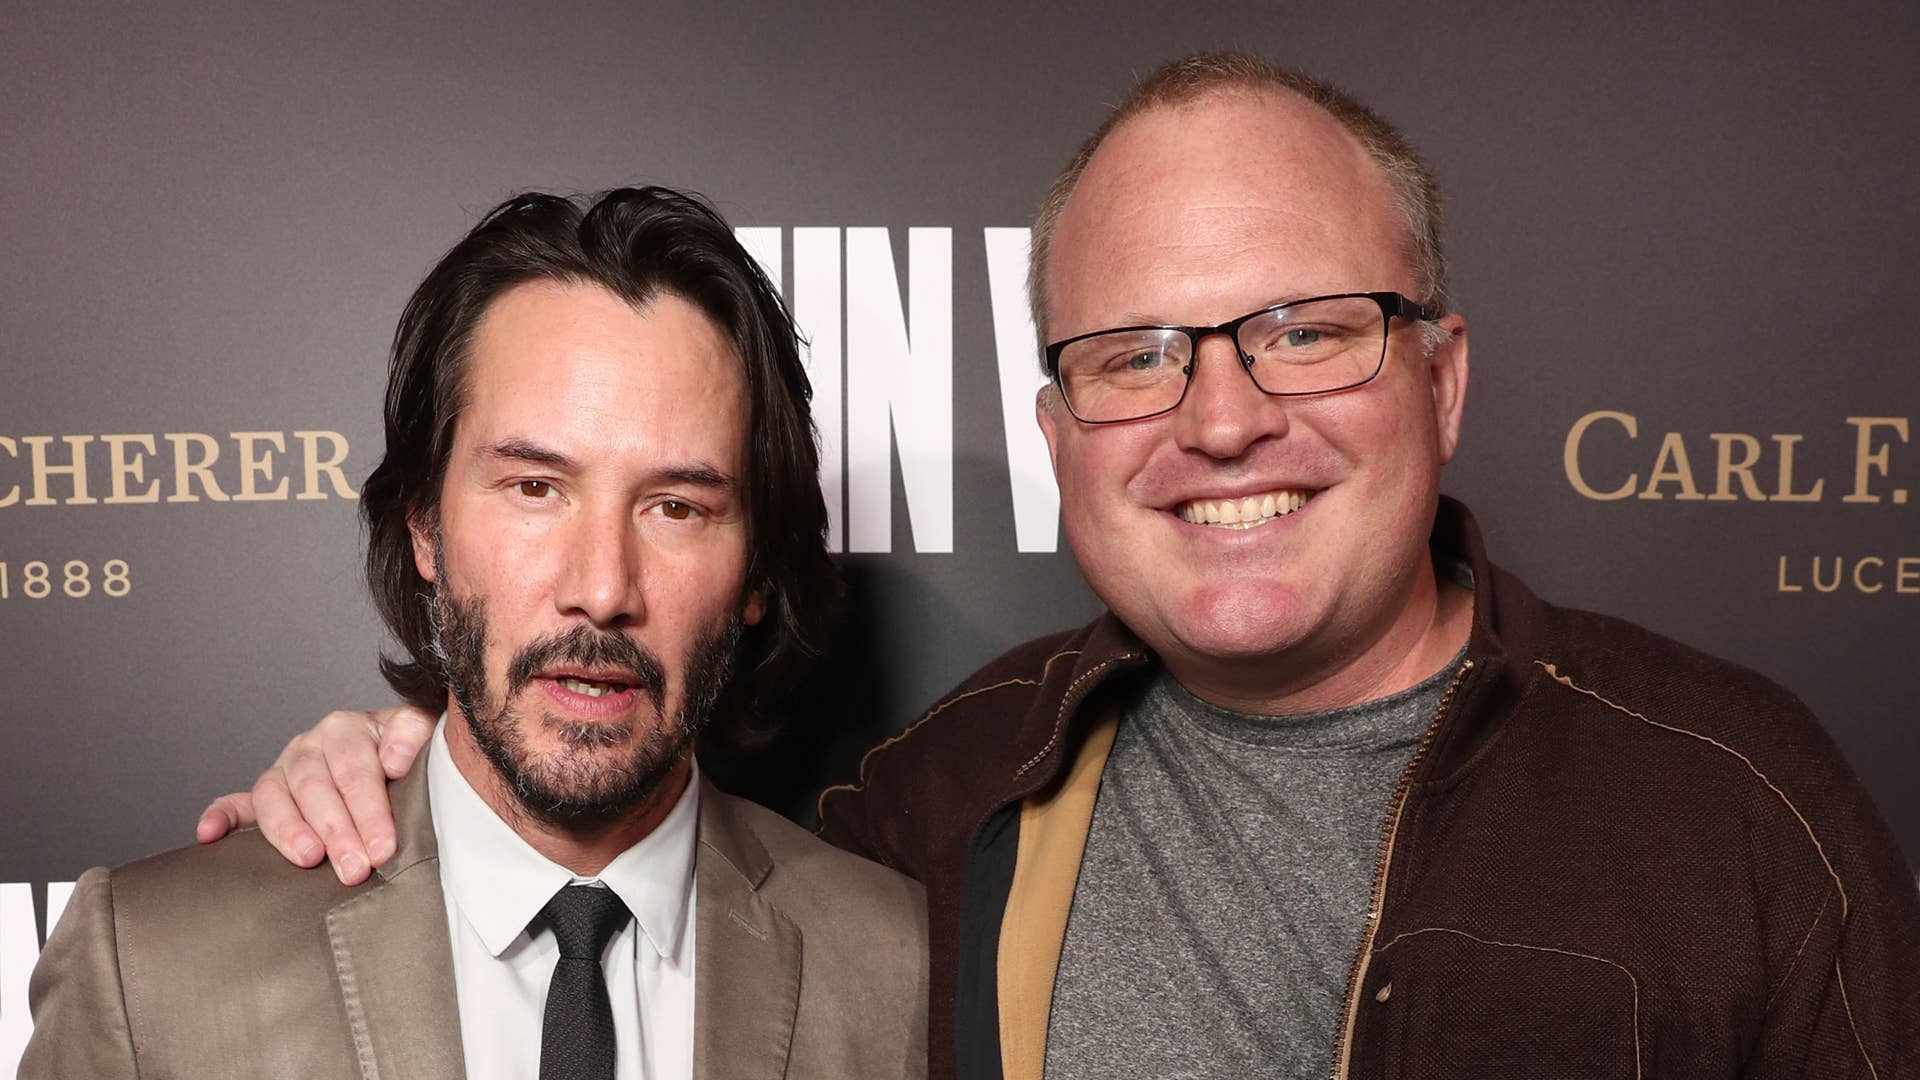 John Wick 4 Release Date In Doubt As Keanu Reeves Has To Finish